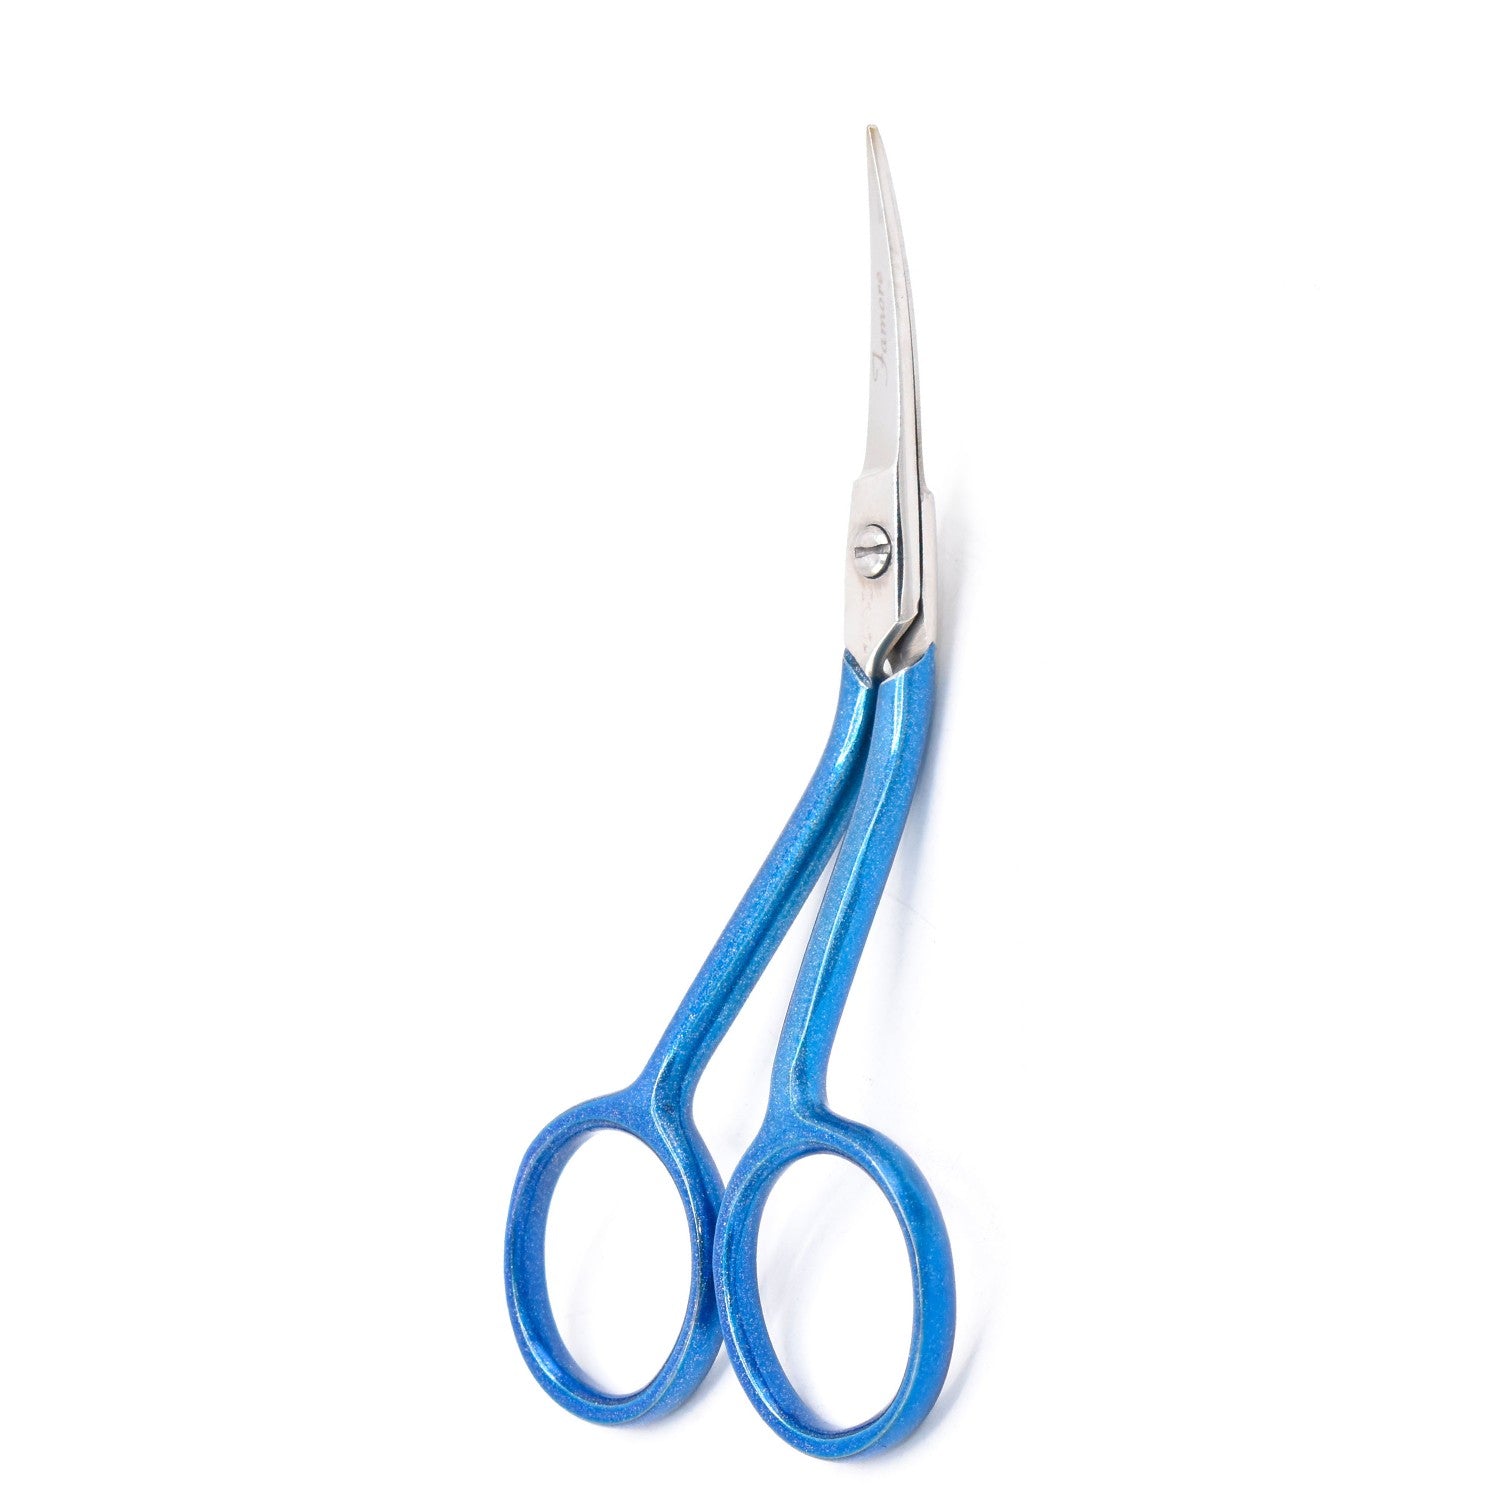 True Left Handed Mini Double Curved Embroidery Scissors from Famore Cutlery